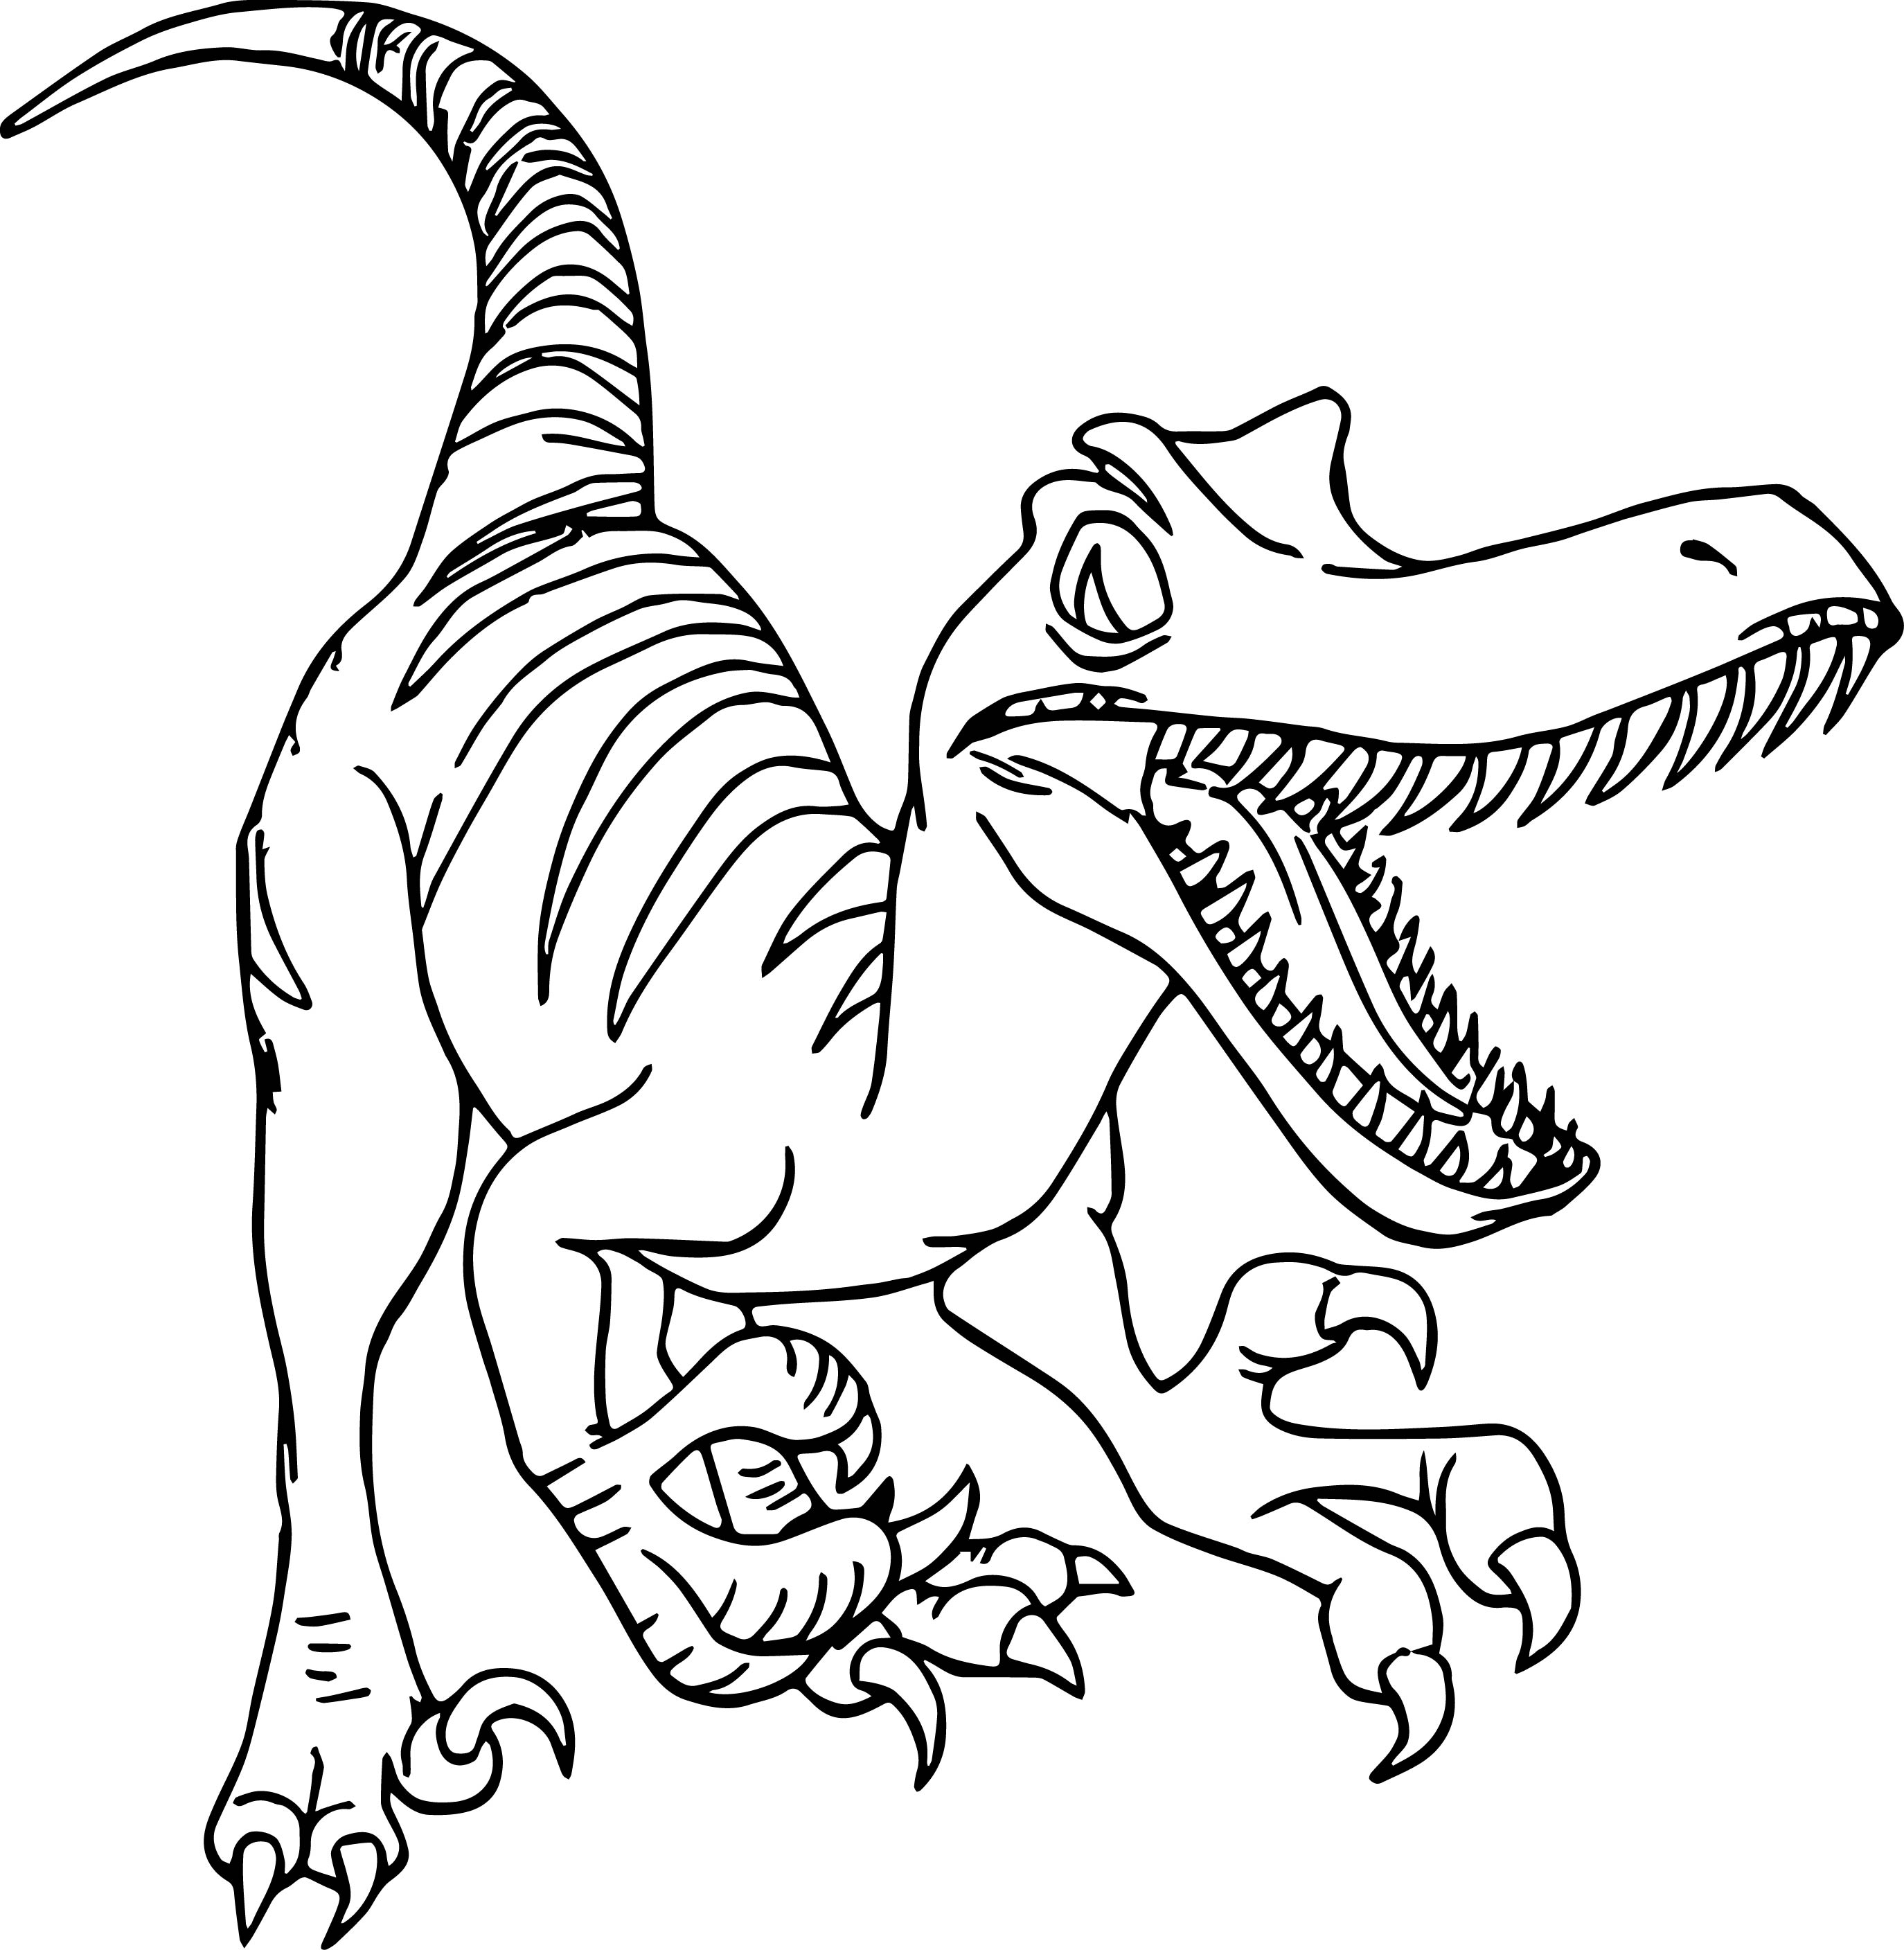 Realistic Velociraptor Coloring Pages - Kronikiszajse